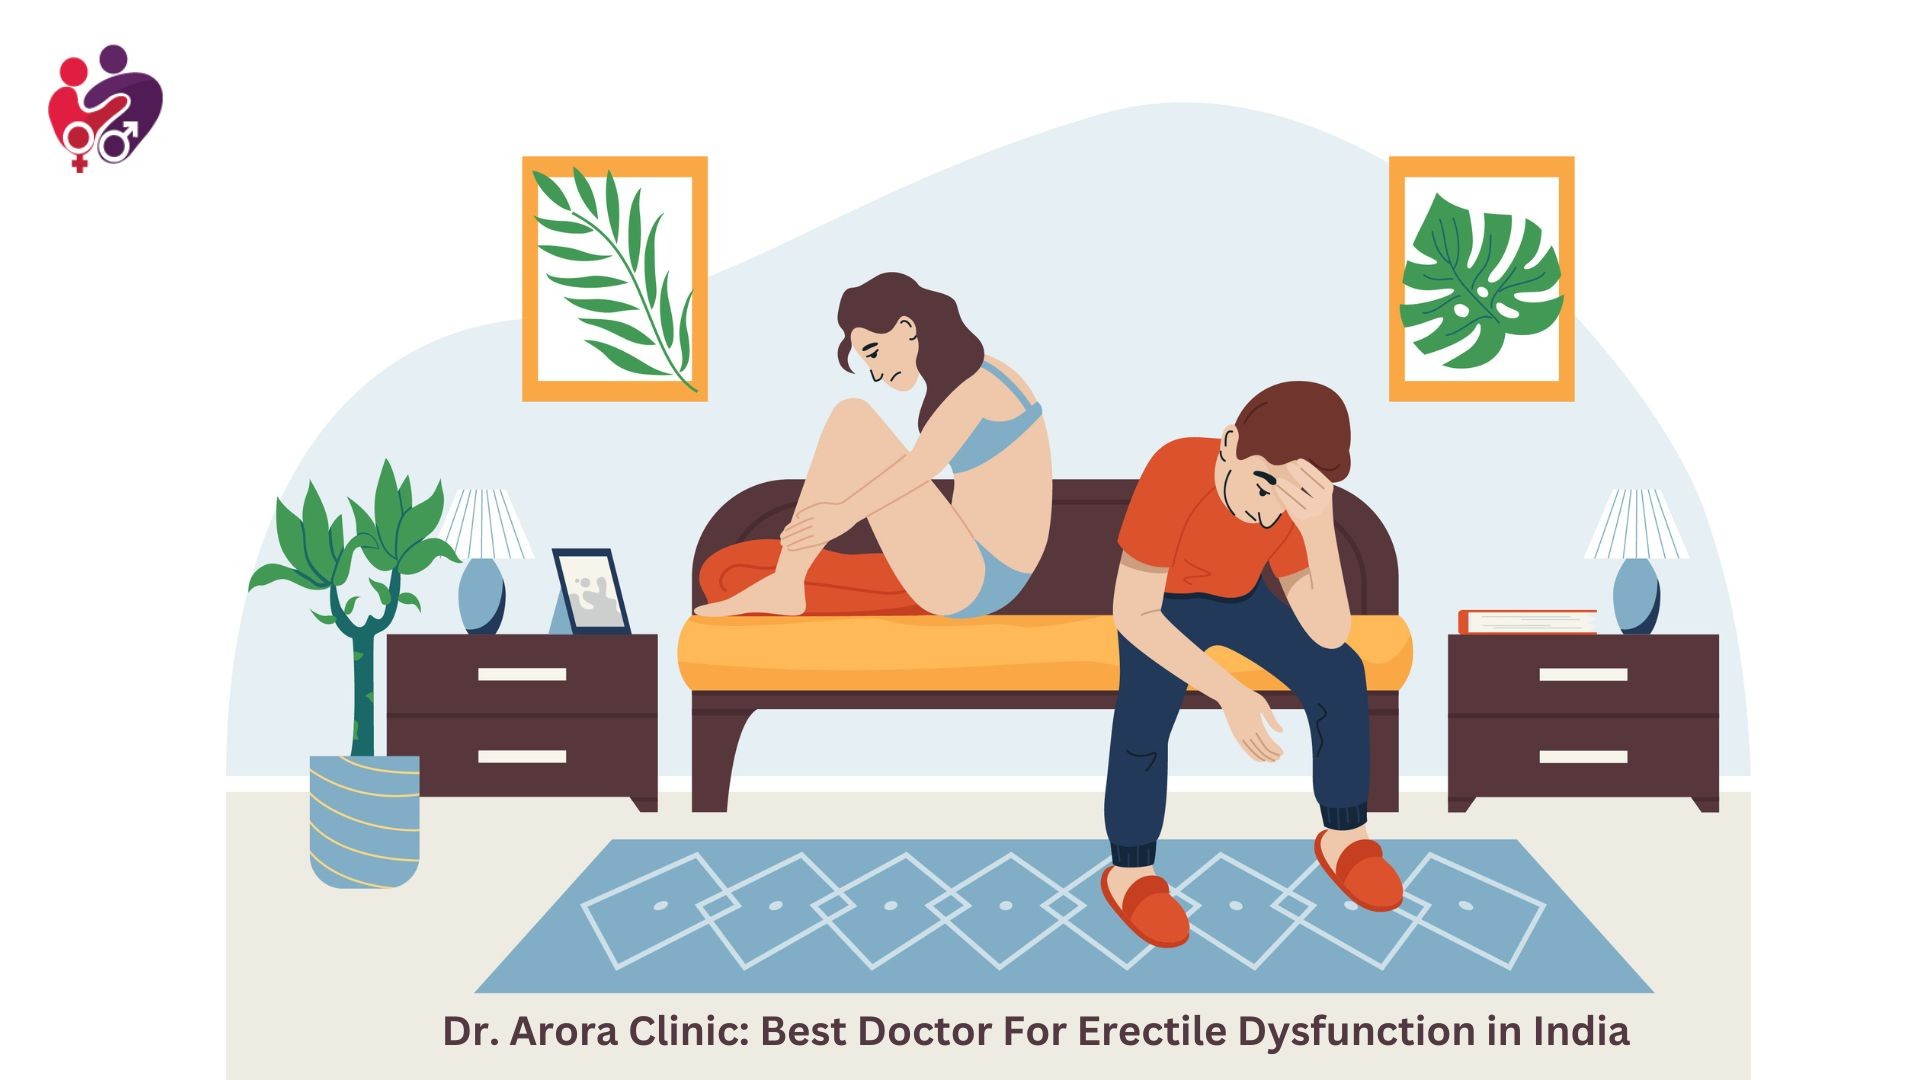 Dr. Arora Clinic: Best Doctor For Erectile Dysfunction in India